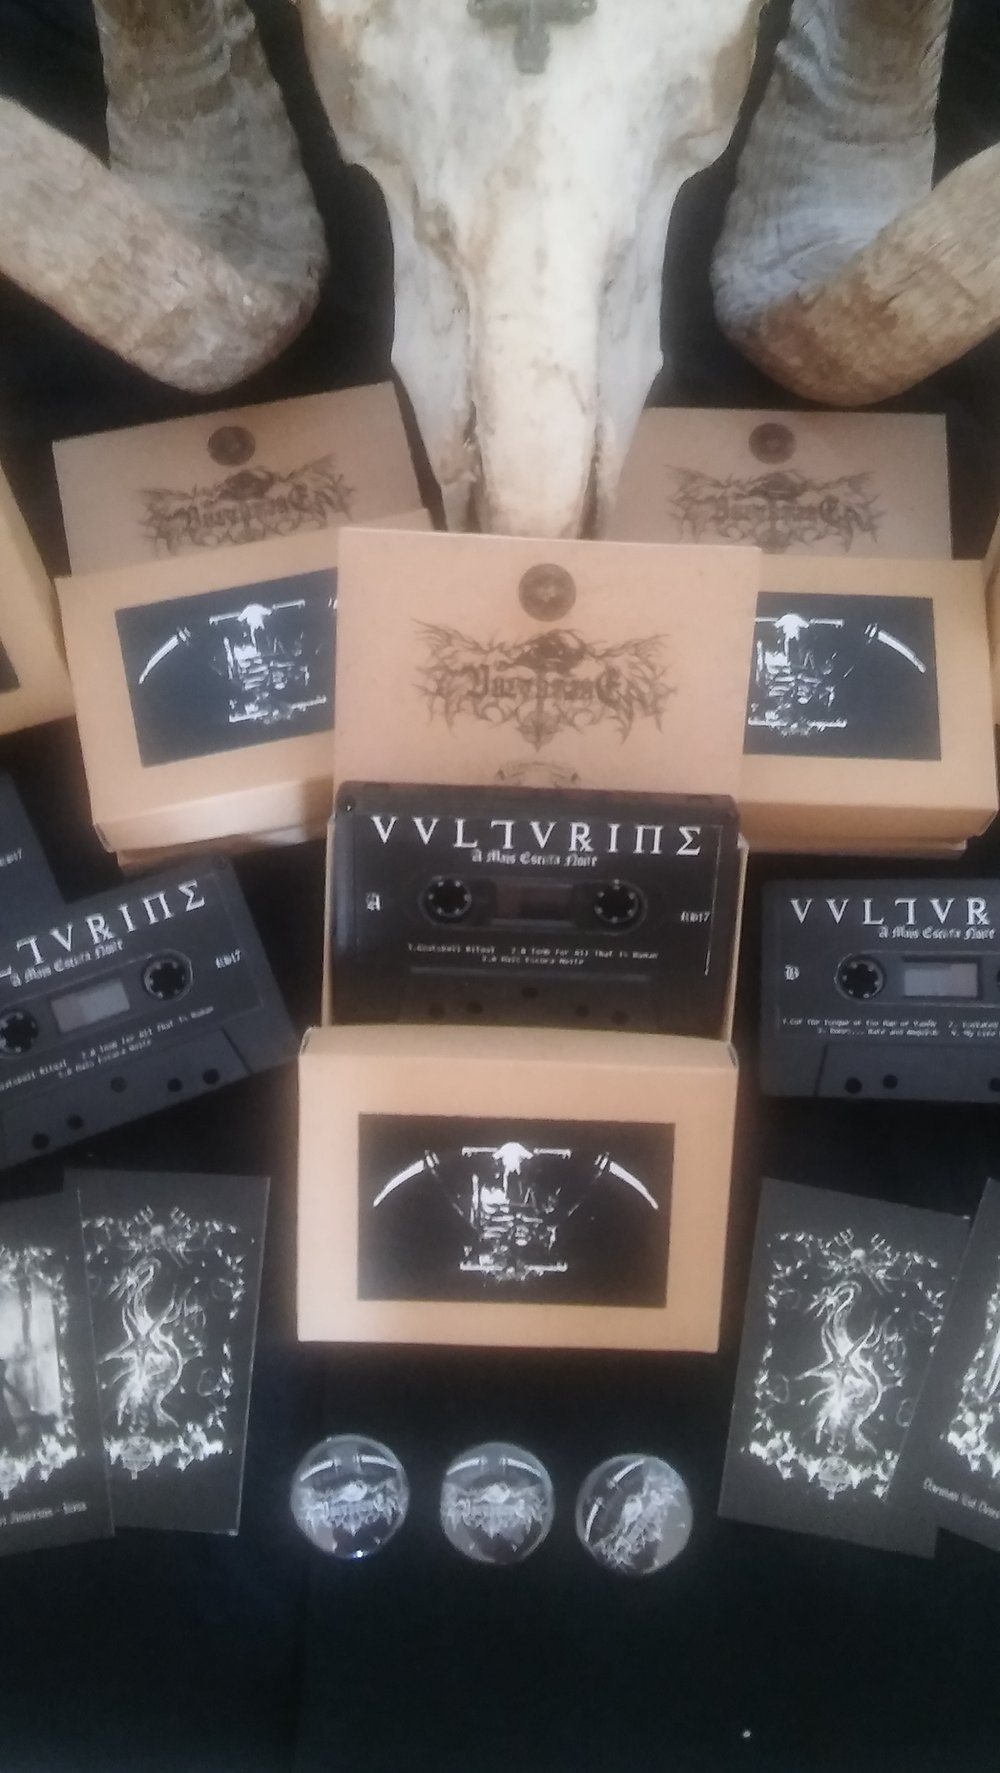 VULTURINE - "A Mais Escura Noite"  (RB19) special tape edition (limited to 66 copies)